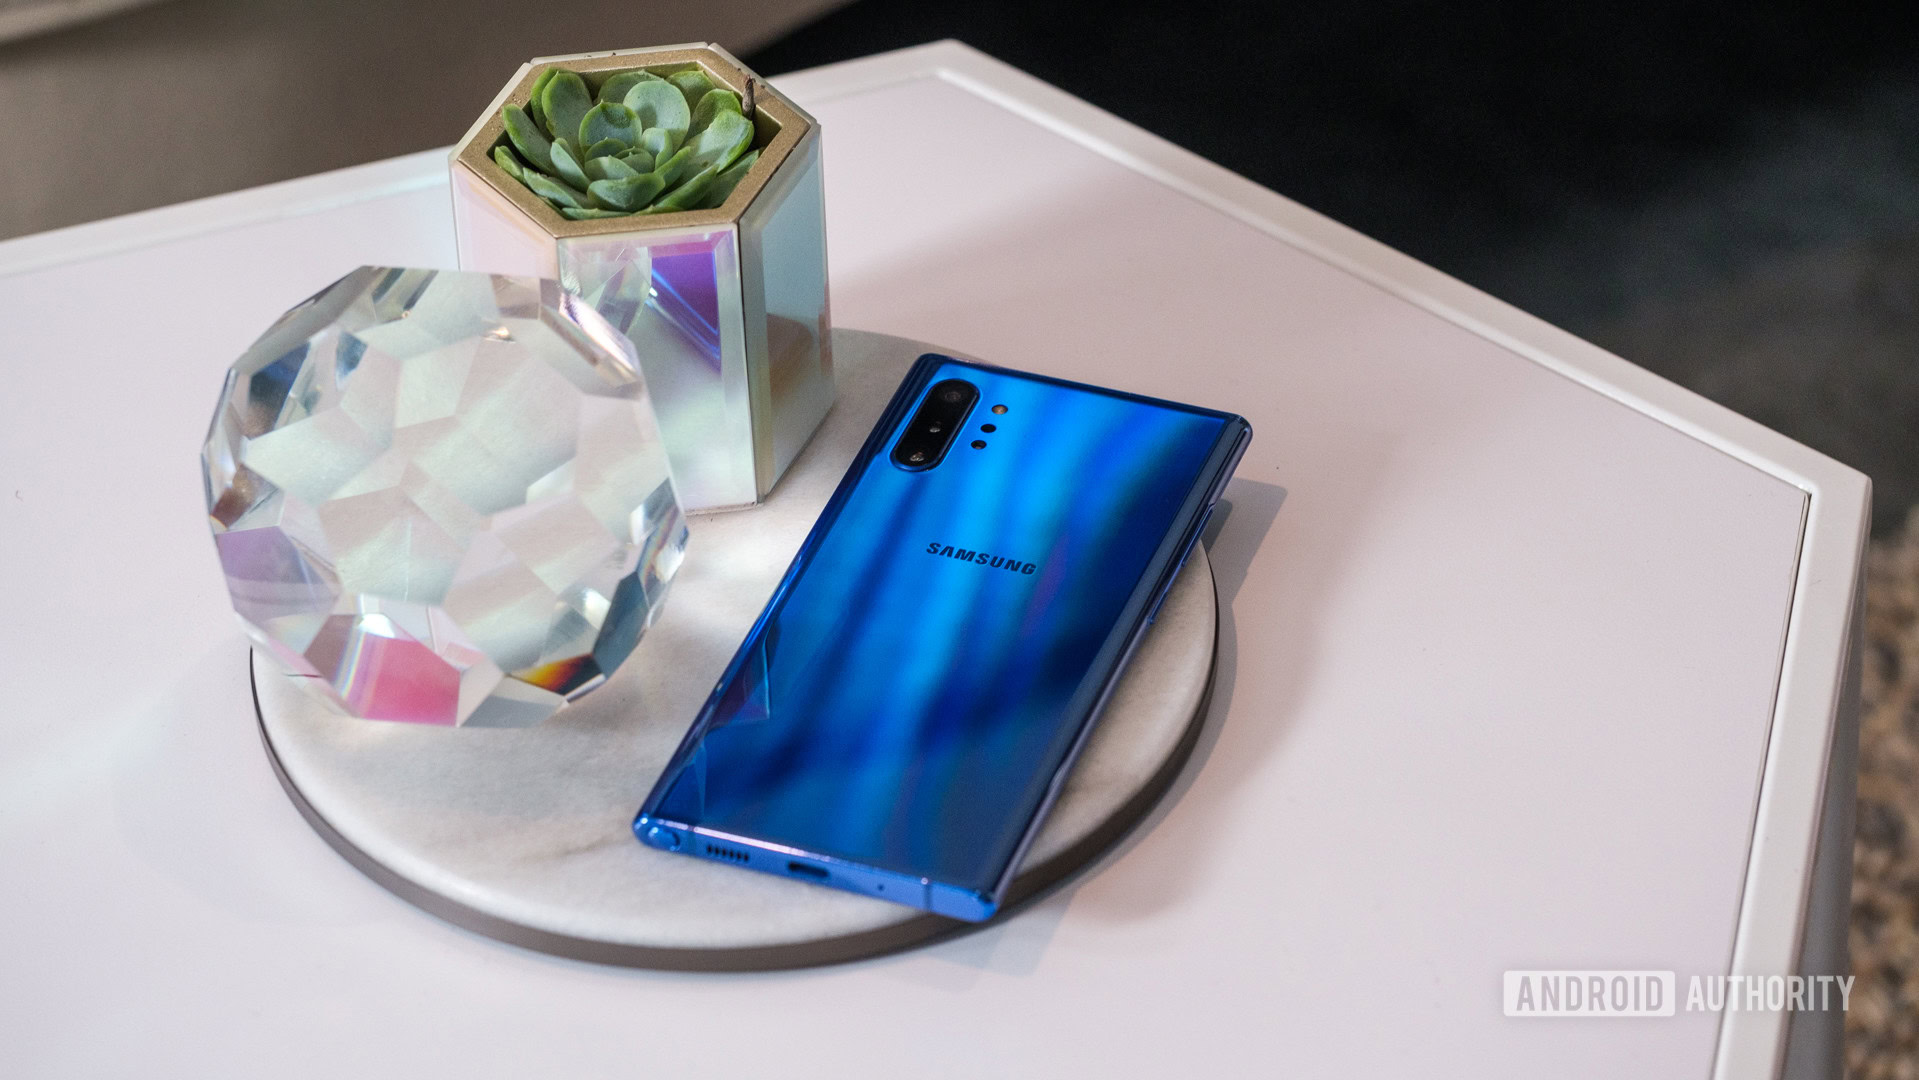 Samsung Galaxy Note 10: Is it worth the upgrade? - CNET